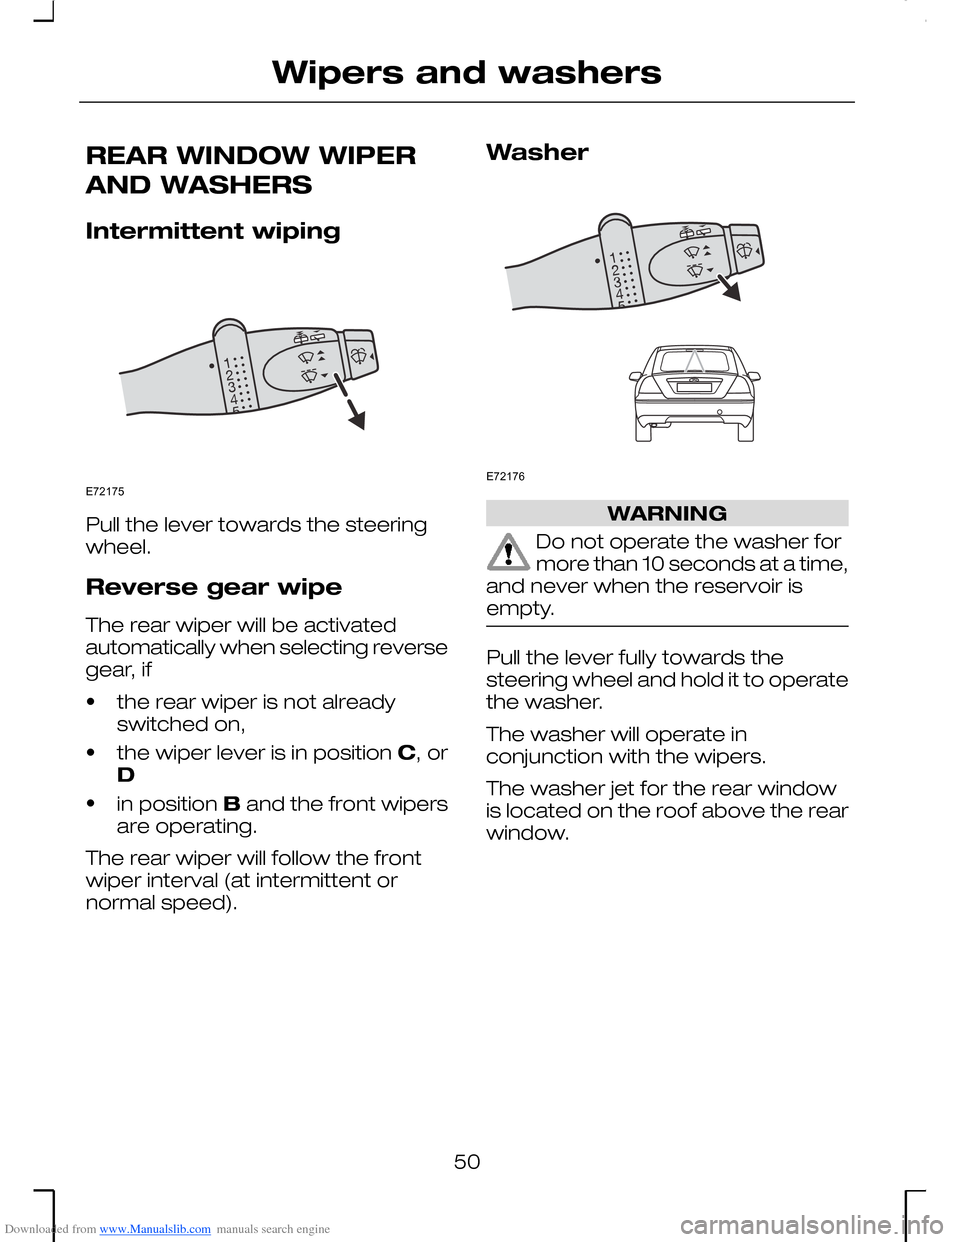 FORD MONDEO 2006 2.G Owners Manual Downloaded from www.Manualslib.com manuals search engine REAR WINDOW WIPER
AND WASHERS
Intermittent wiping
Pull the lever towards the steeringwheel.
Reverse gear wipe
The rear wiper will be activateda